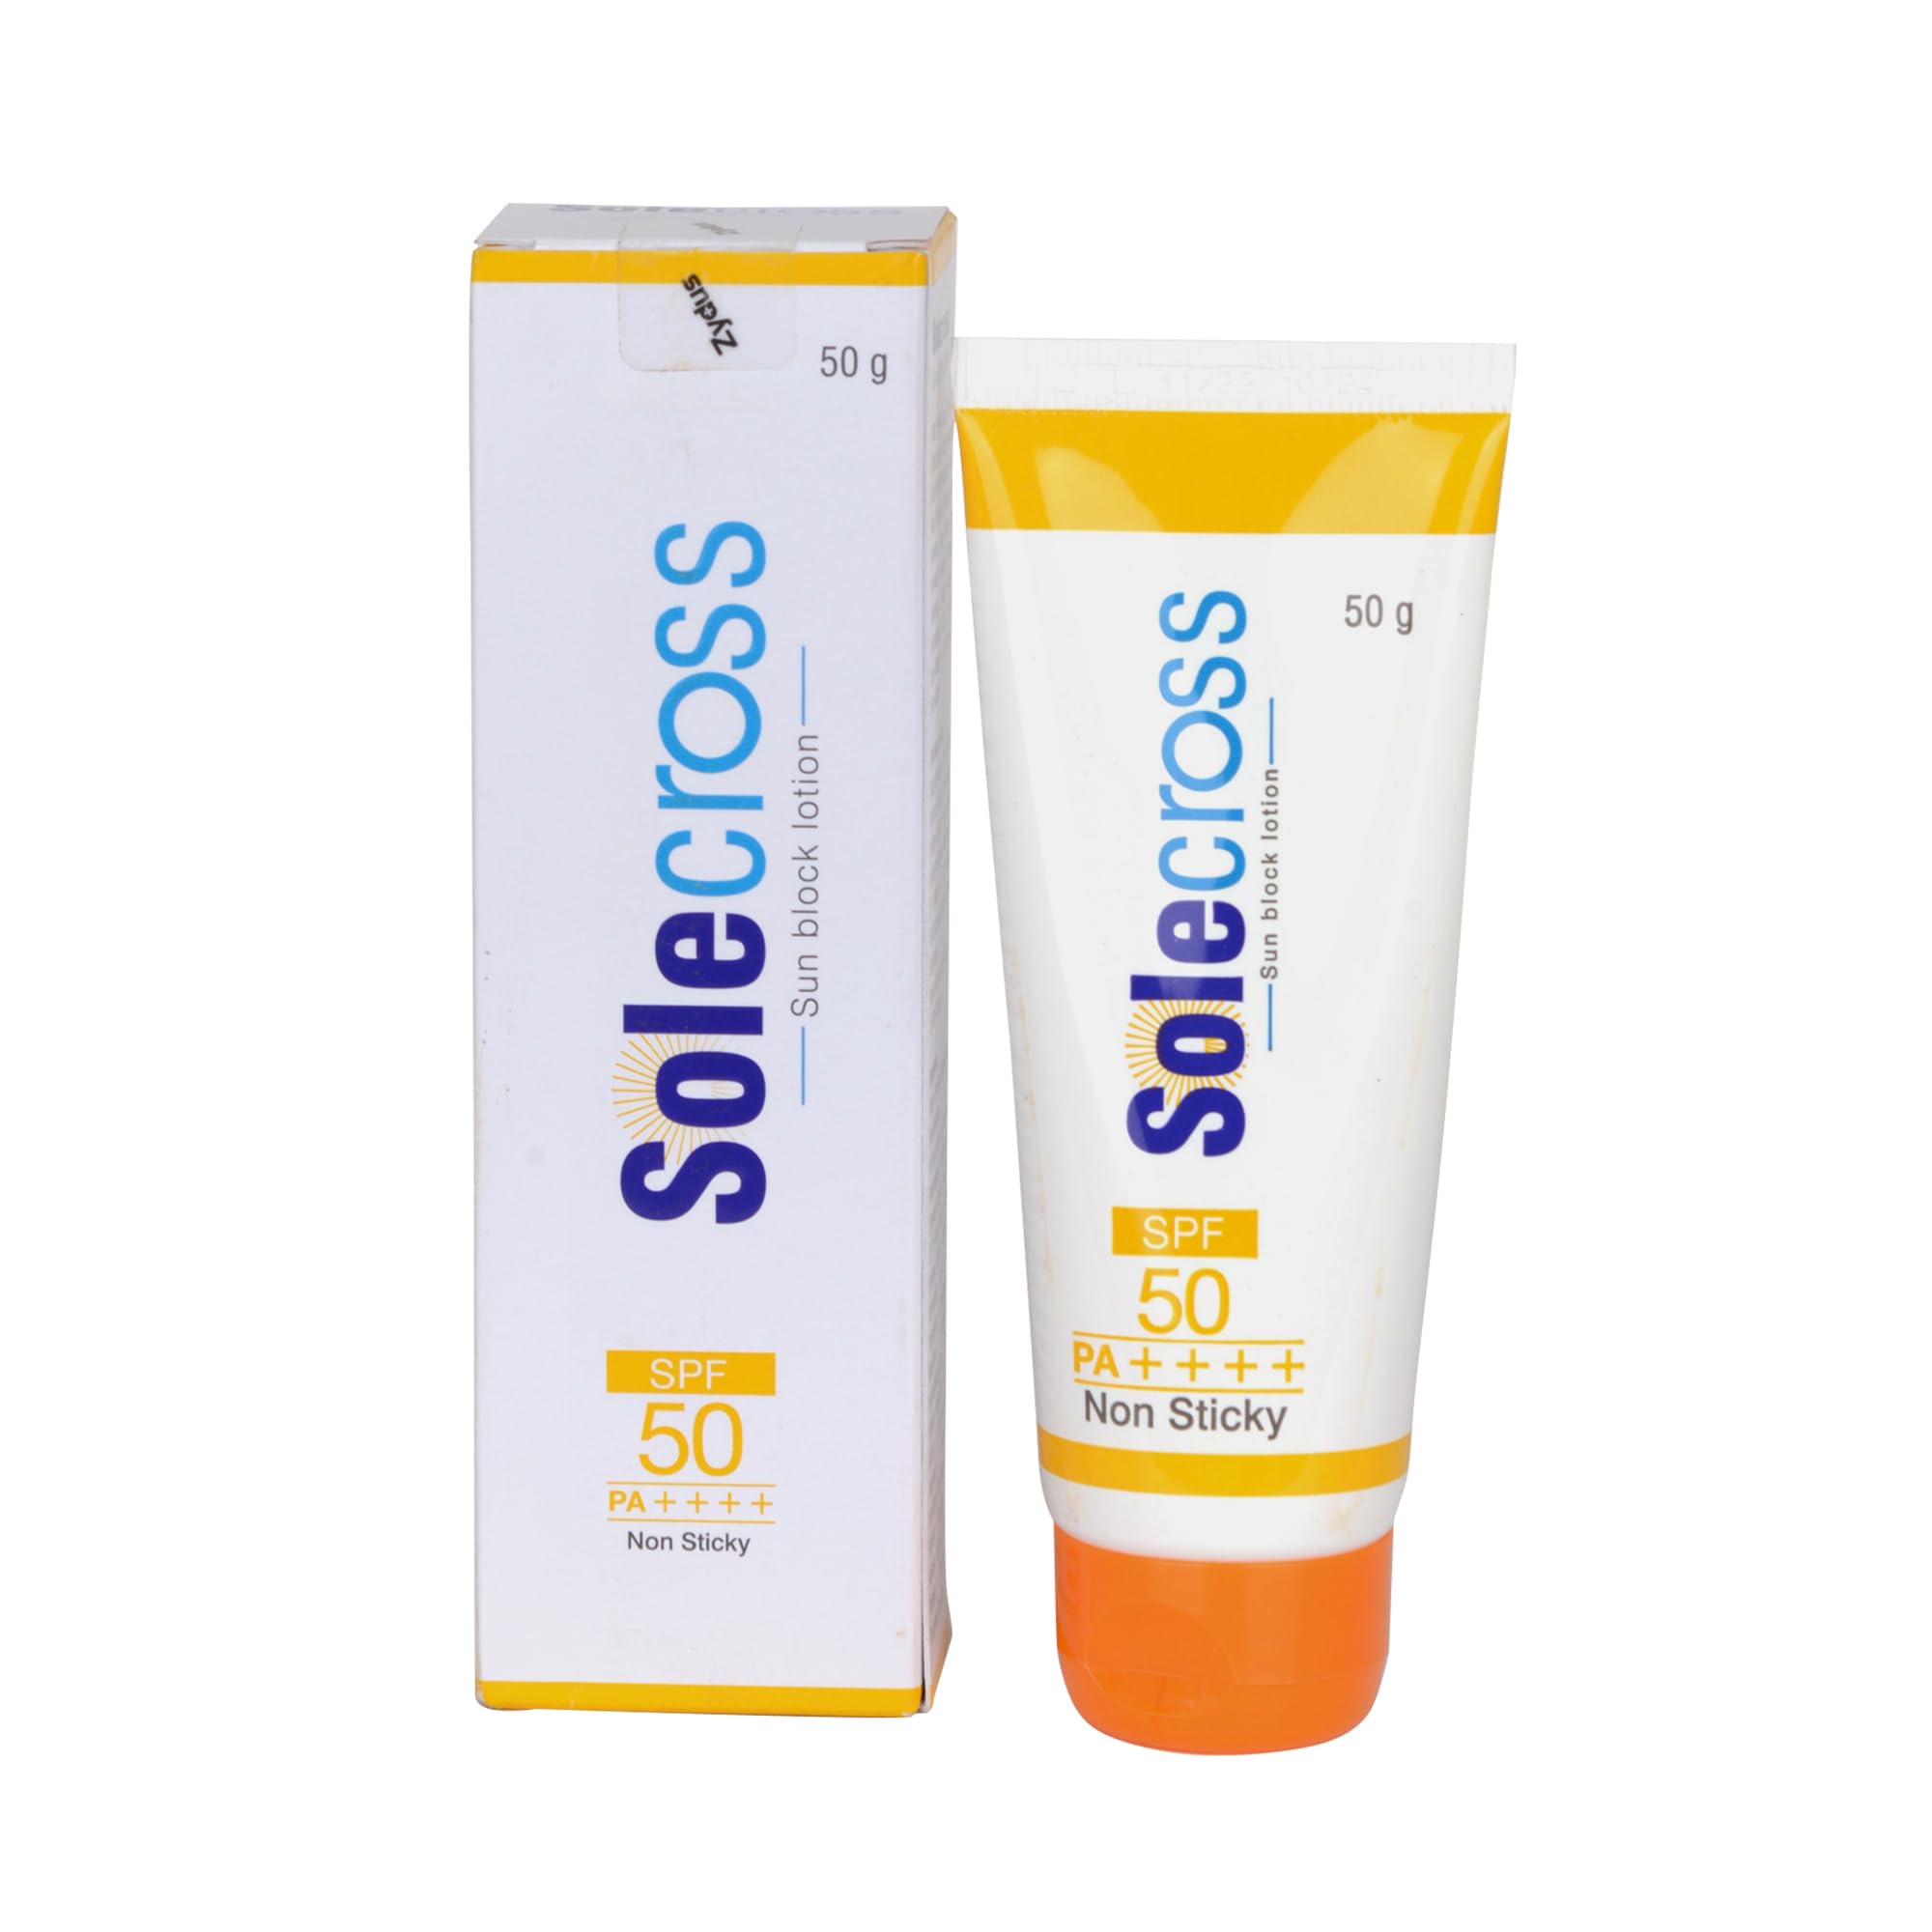 Solecross Sun Block Sunscreen Lotion | SPF 50 PA++++ for UVA/UVB Protection